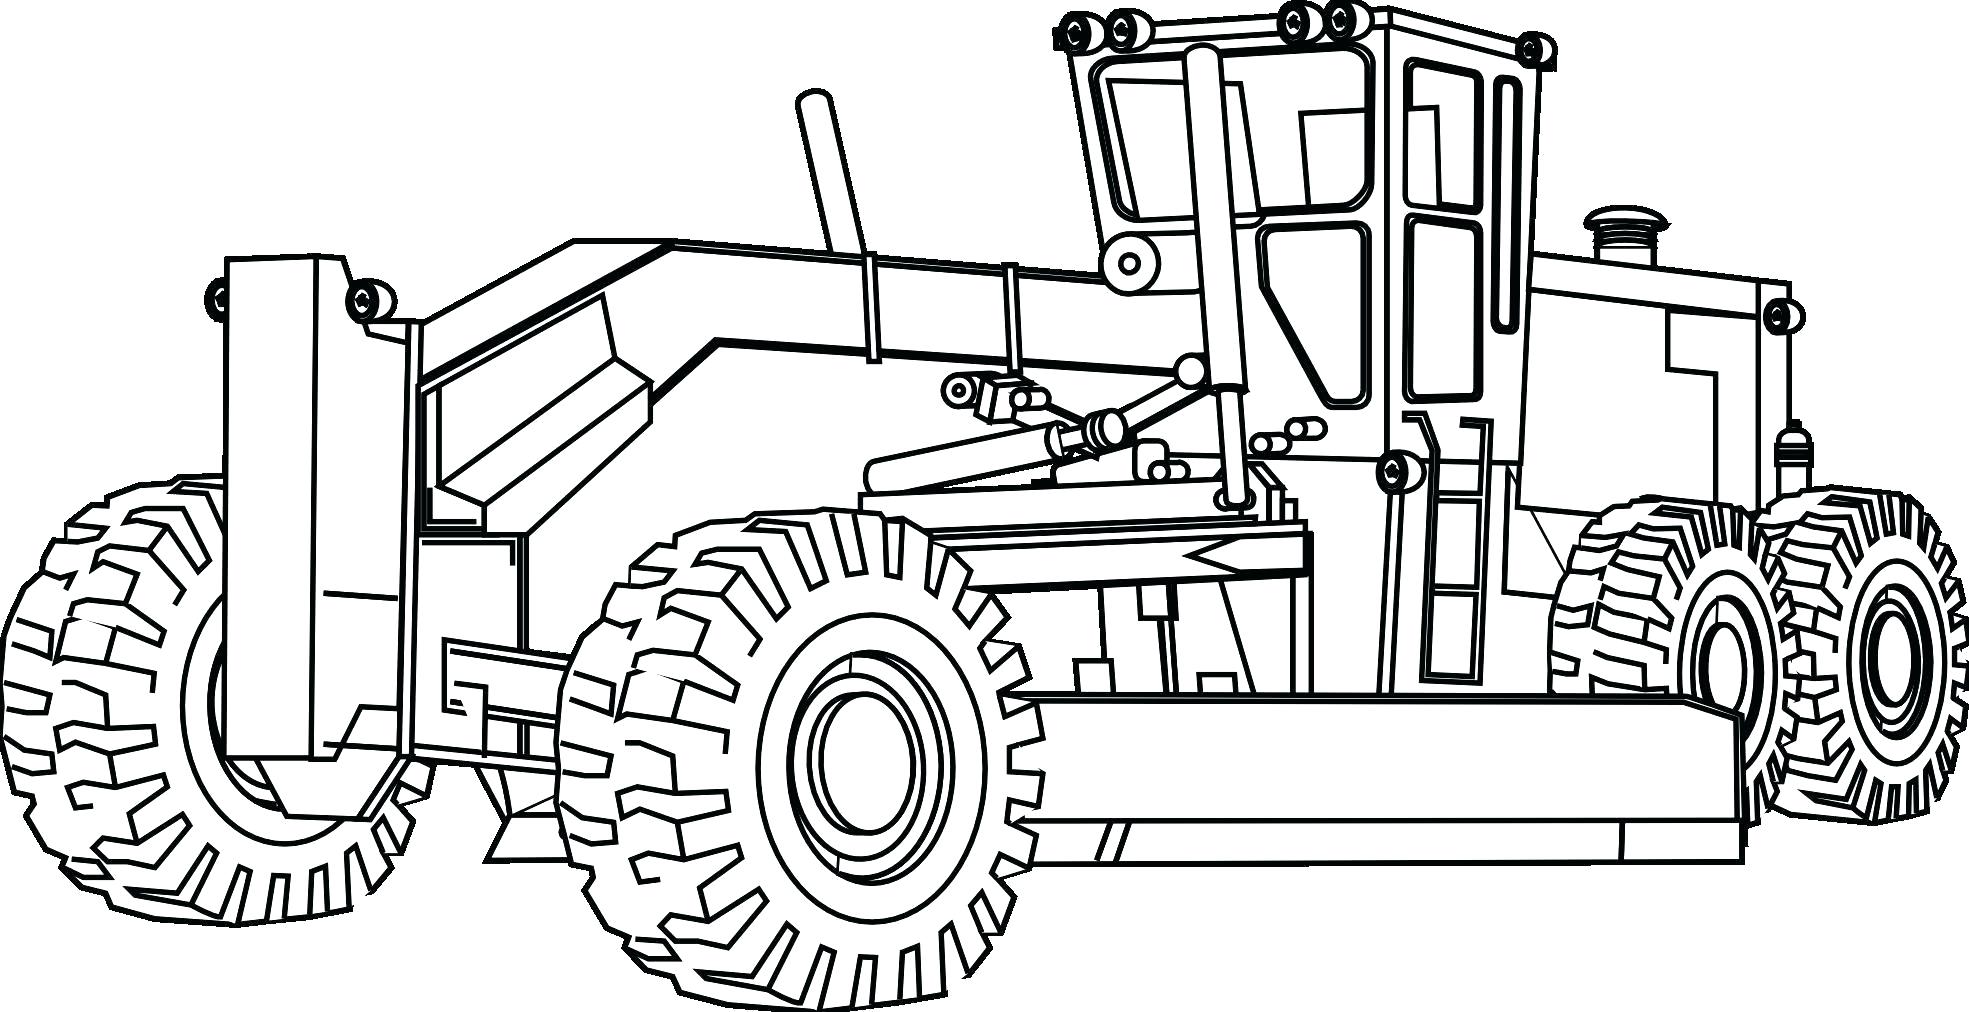 Coloring : Extraordinary Construction Coloringagesrintable Vehicle Monsterk  Luxury Best Cool Garbage For Kids Transportation Of Free Tow 42 Pages  Children To Print Printable ~ Americangrassrootscoalition